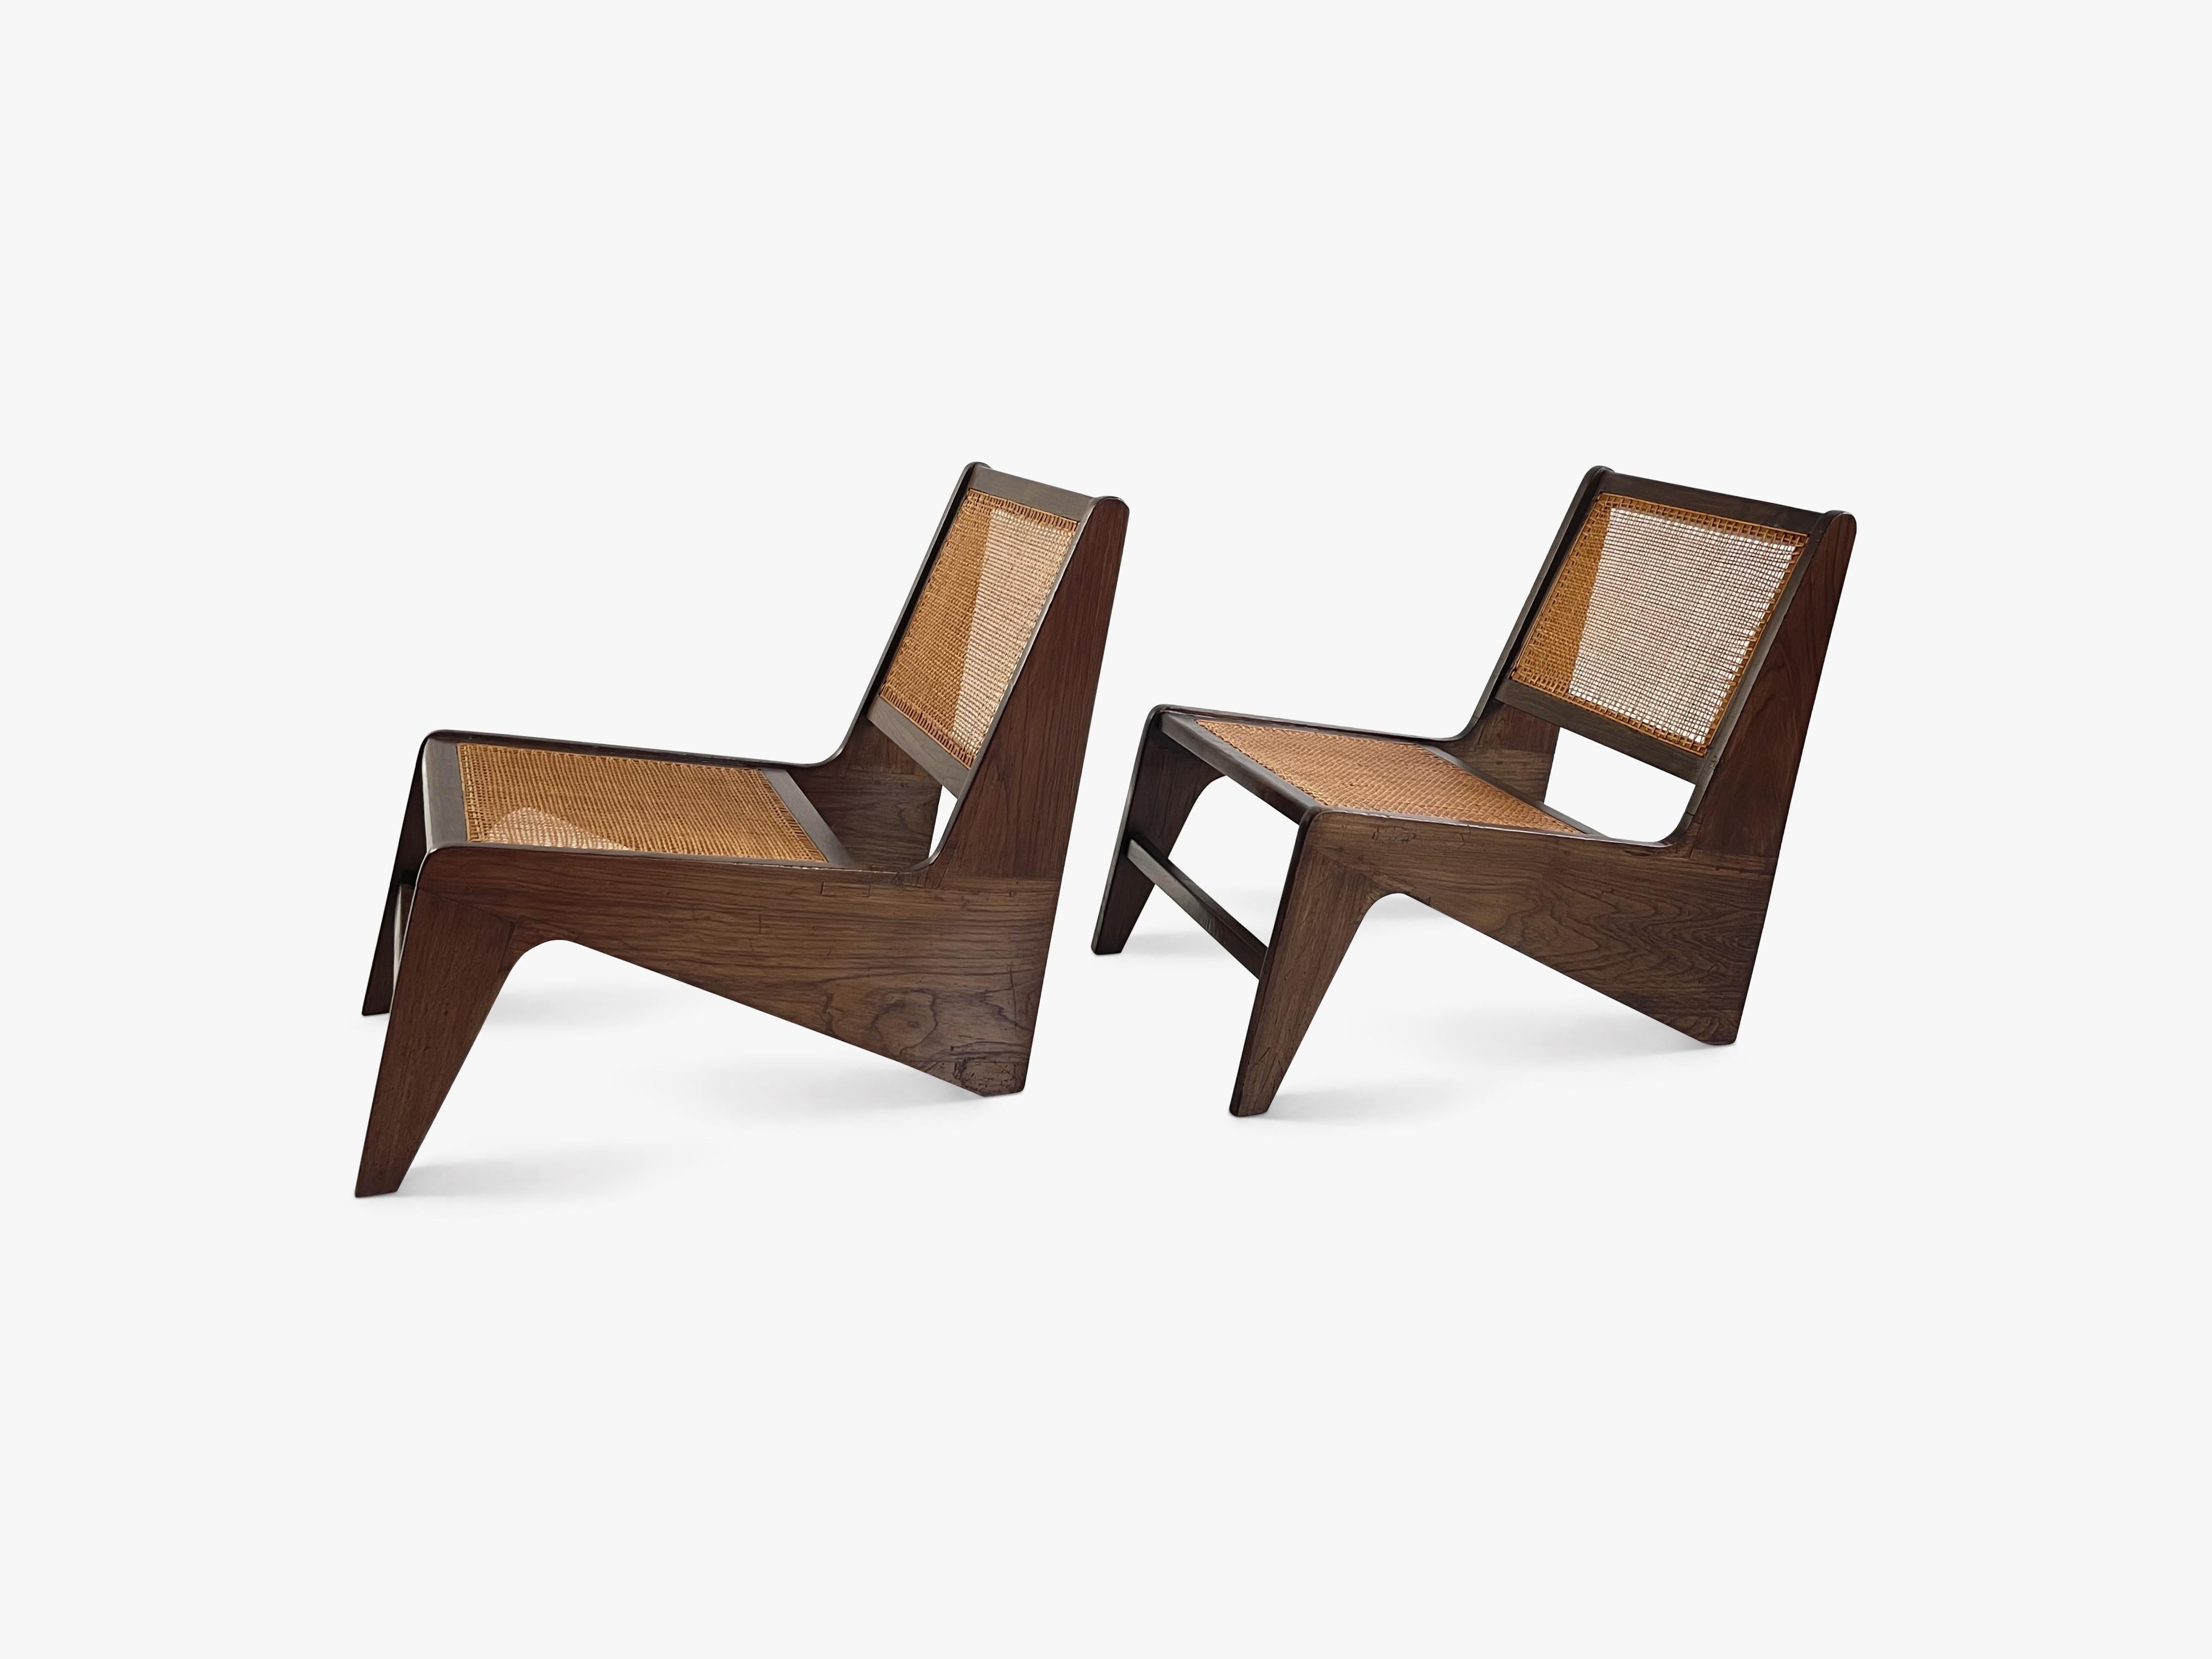 Experts on Pierre Jeanneret and Le Corbusier take note. 

These striking examples show several unique characteristics. Specifically, they are each designed with four matching wood “lock” corner pieces. These locks were utilized to strengthen the